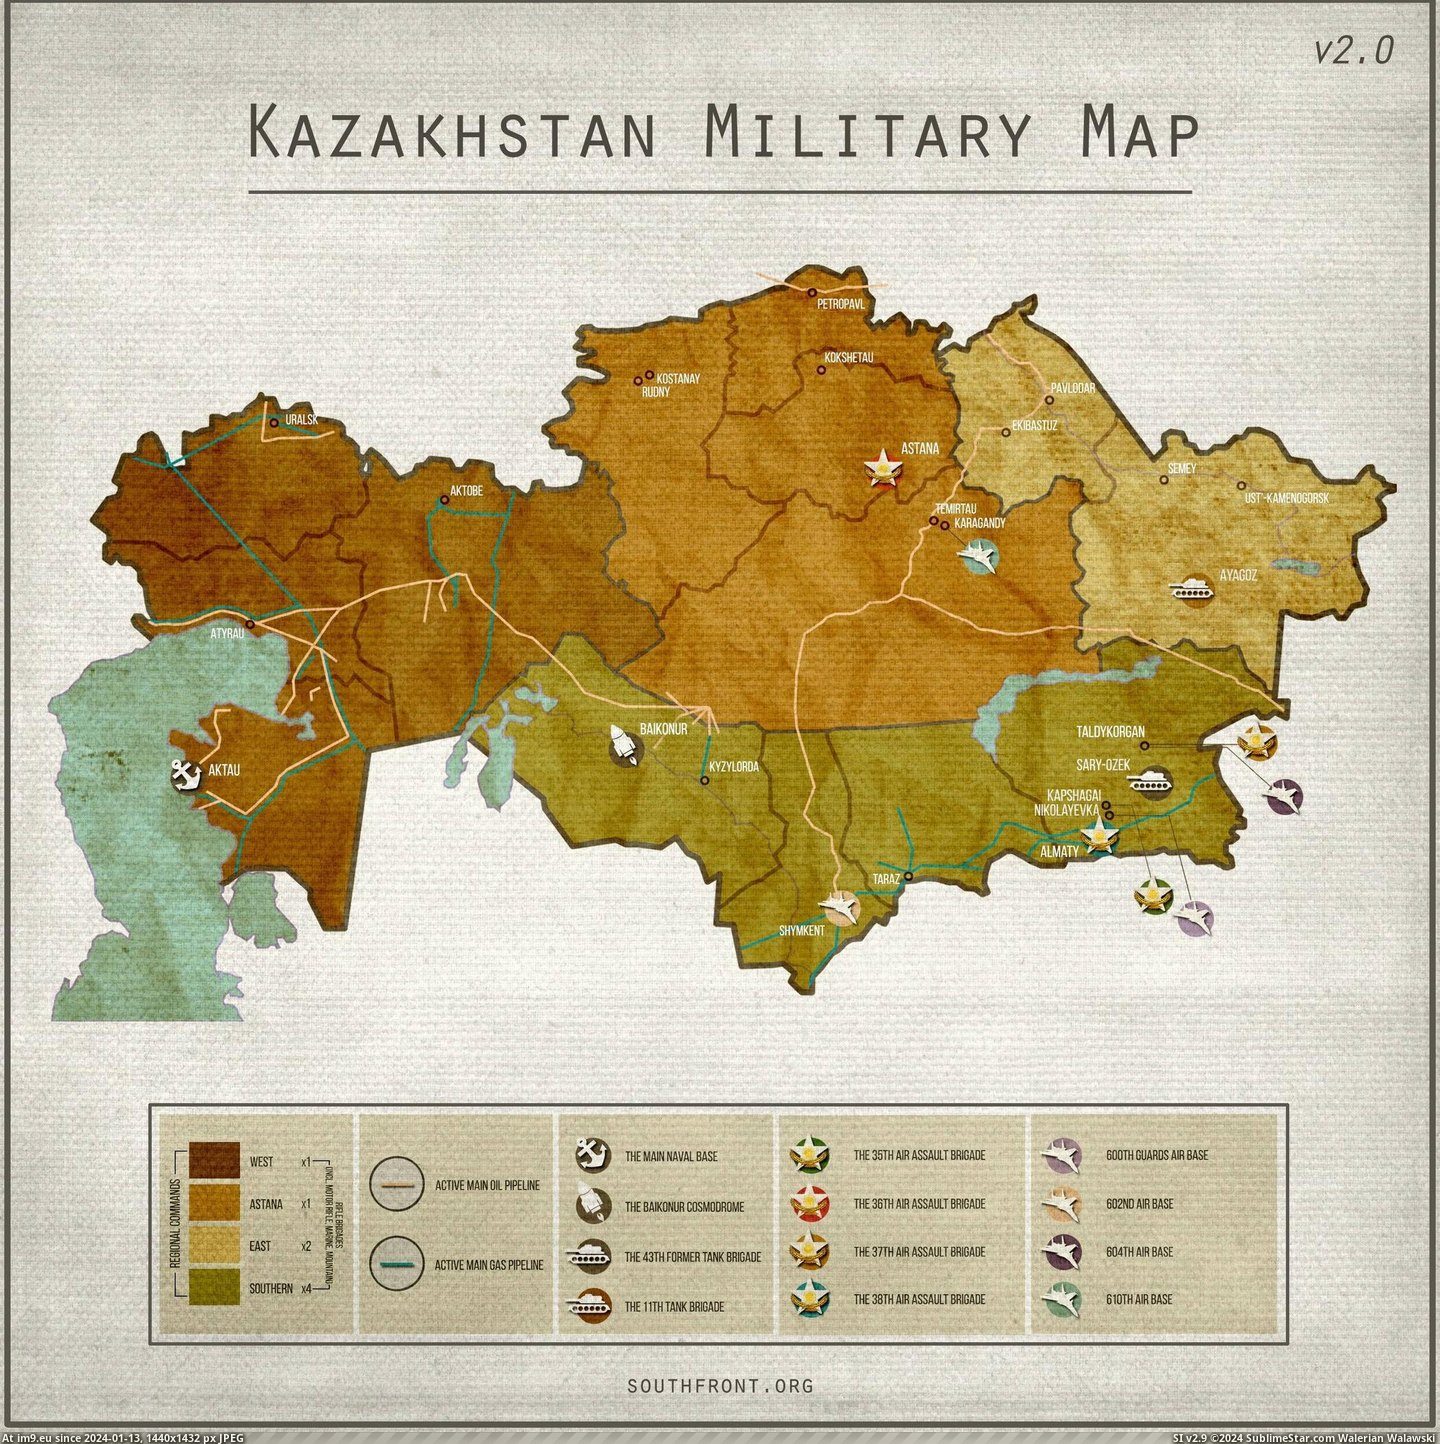 [Mapporn] Kazakhstan military map. [2100x2100] (in My r/MAPS favs)